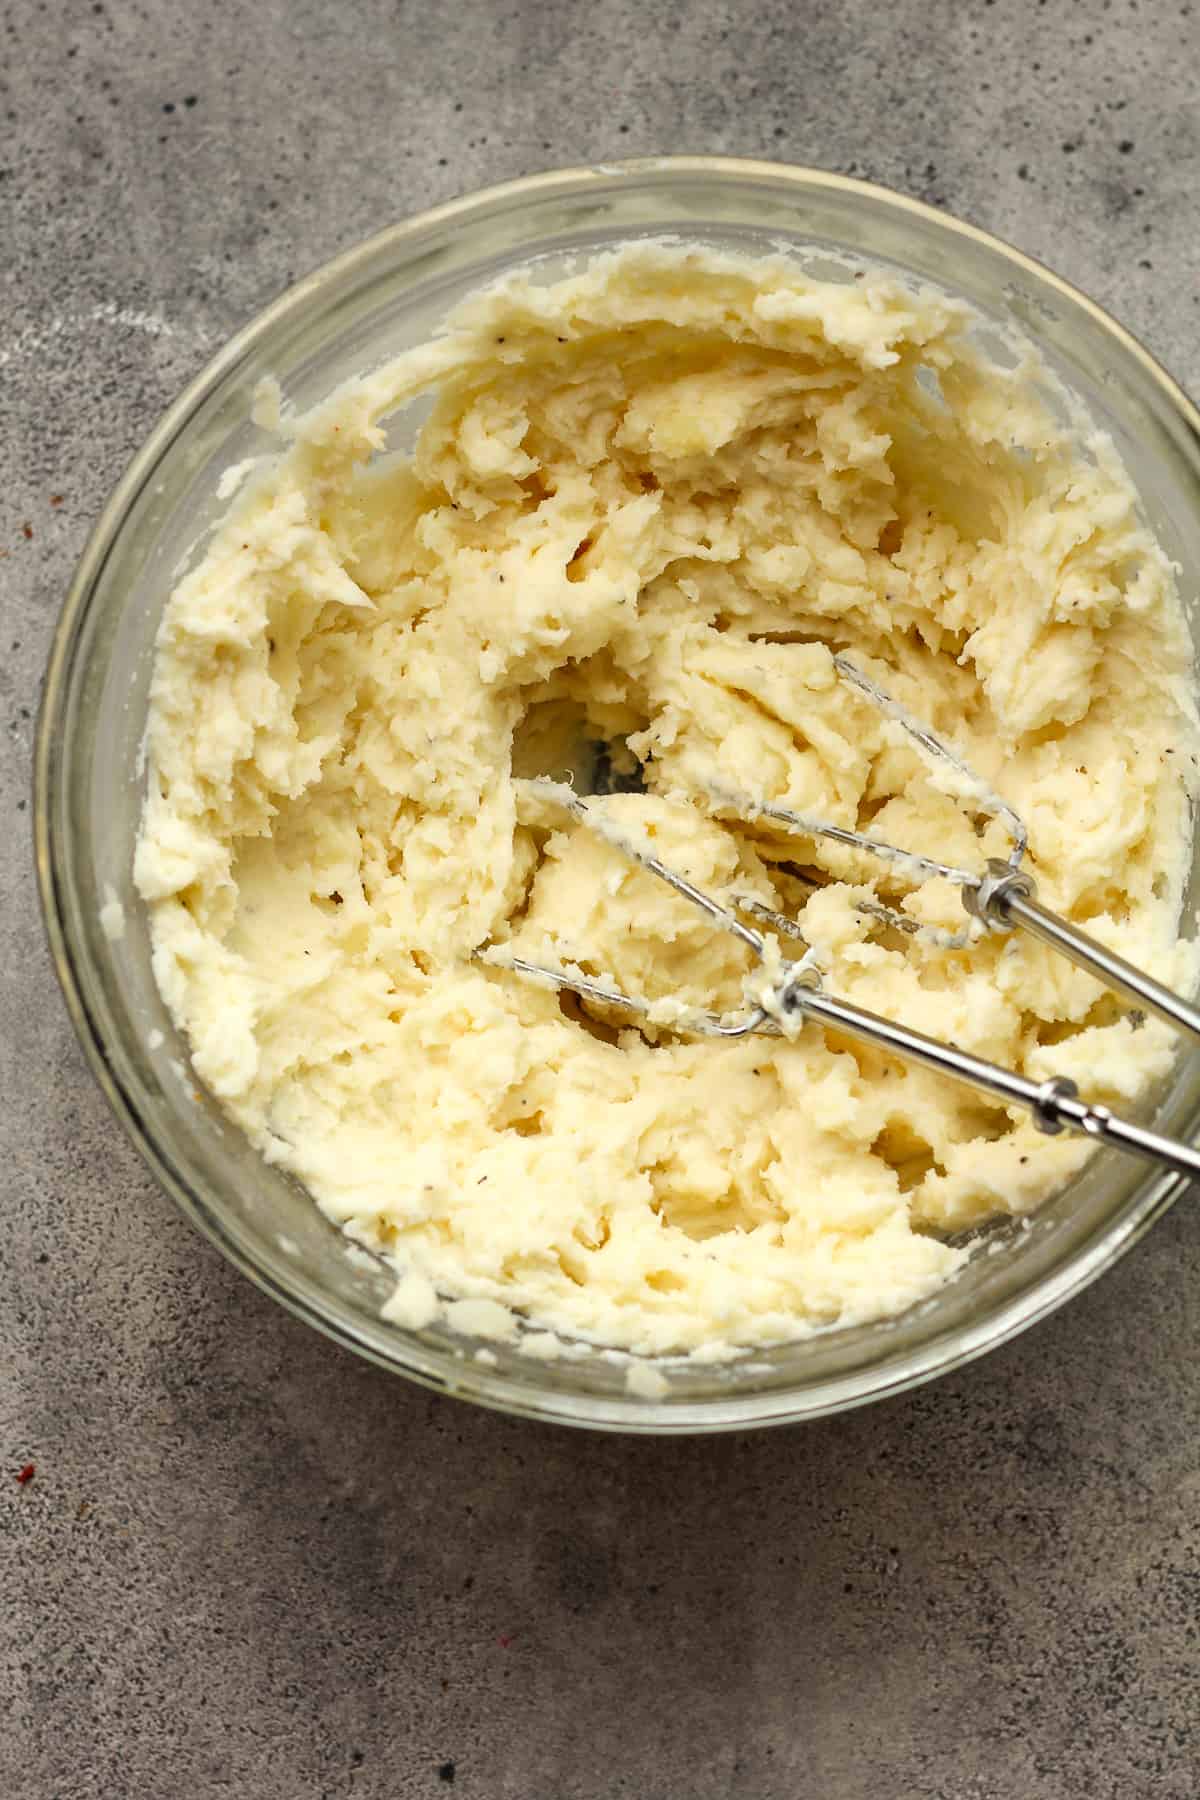 A bowl of the mashed potatoes after mixing.